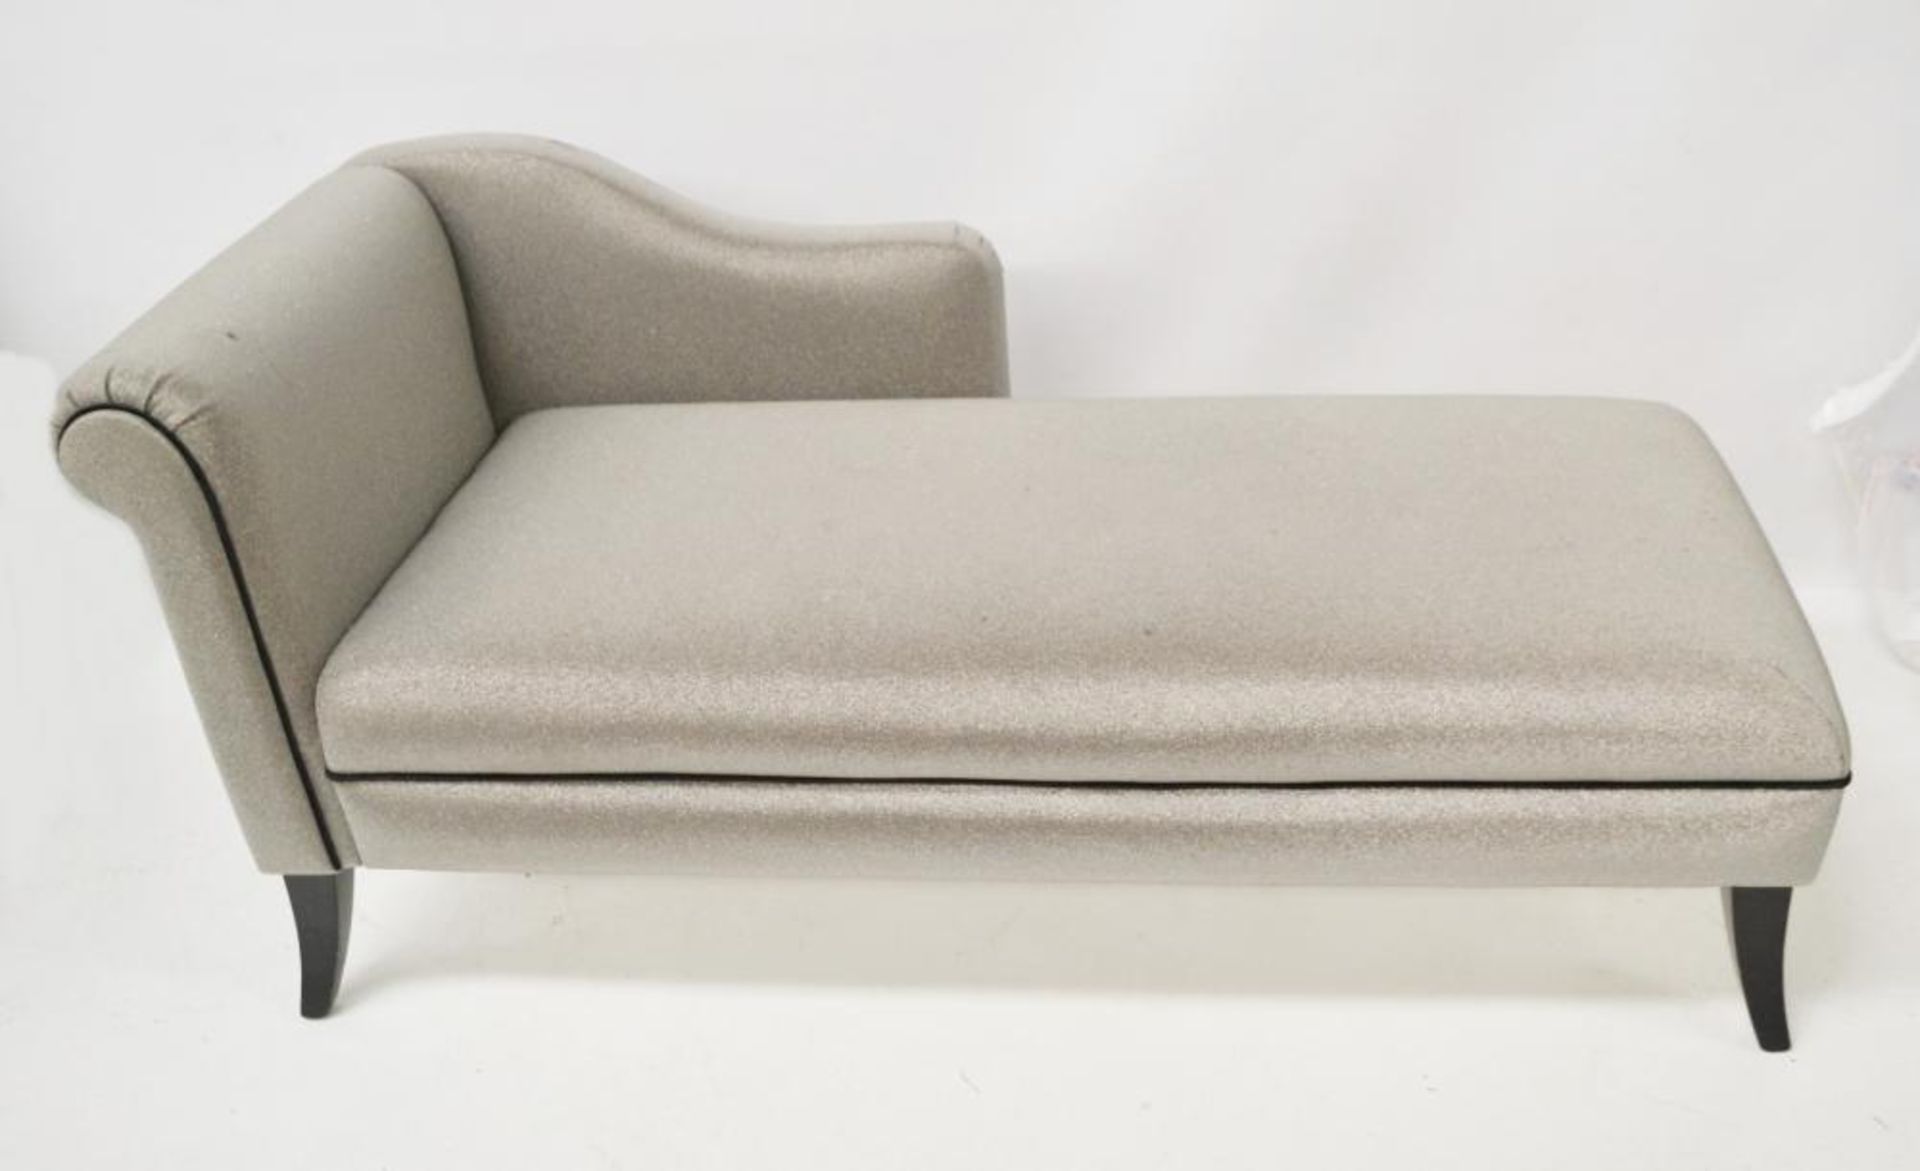 1 x Chaise Lounge Chair Finished In Silver Glitter - Ref: BLT376 - CL380 - NO VAT ON THE HAMMER -